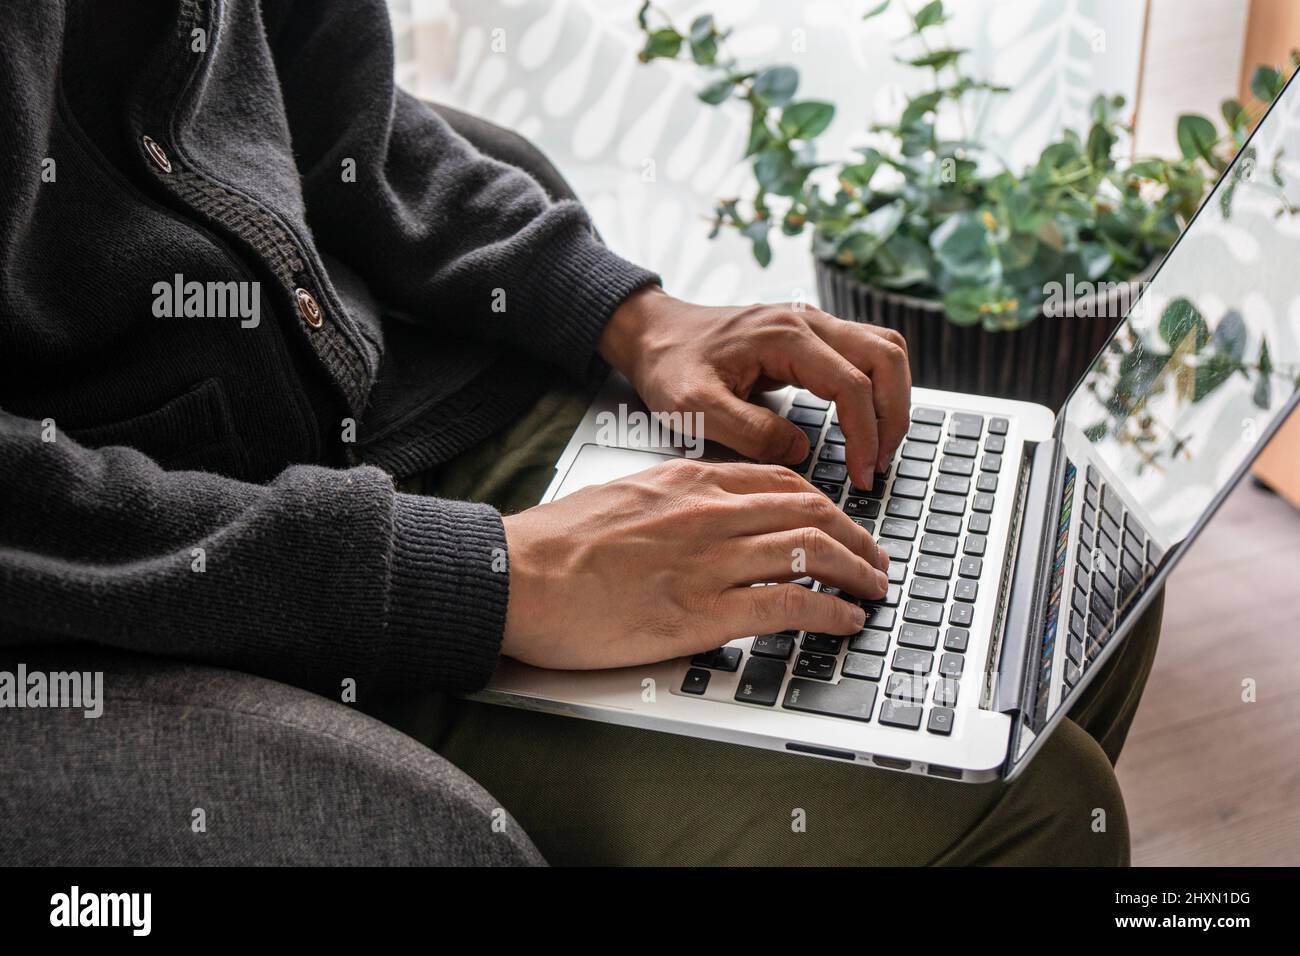 Man working from home, using laptop Stock Photo